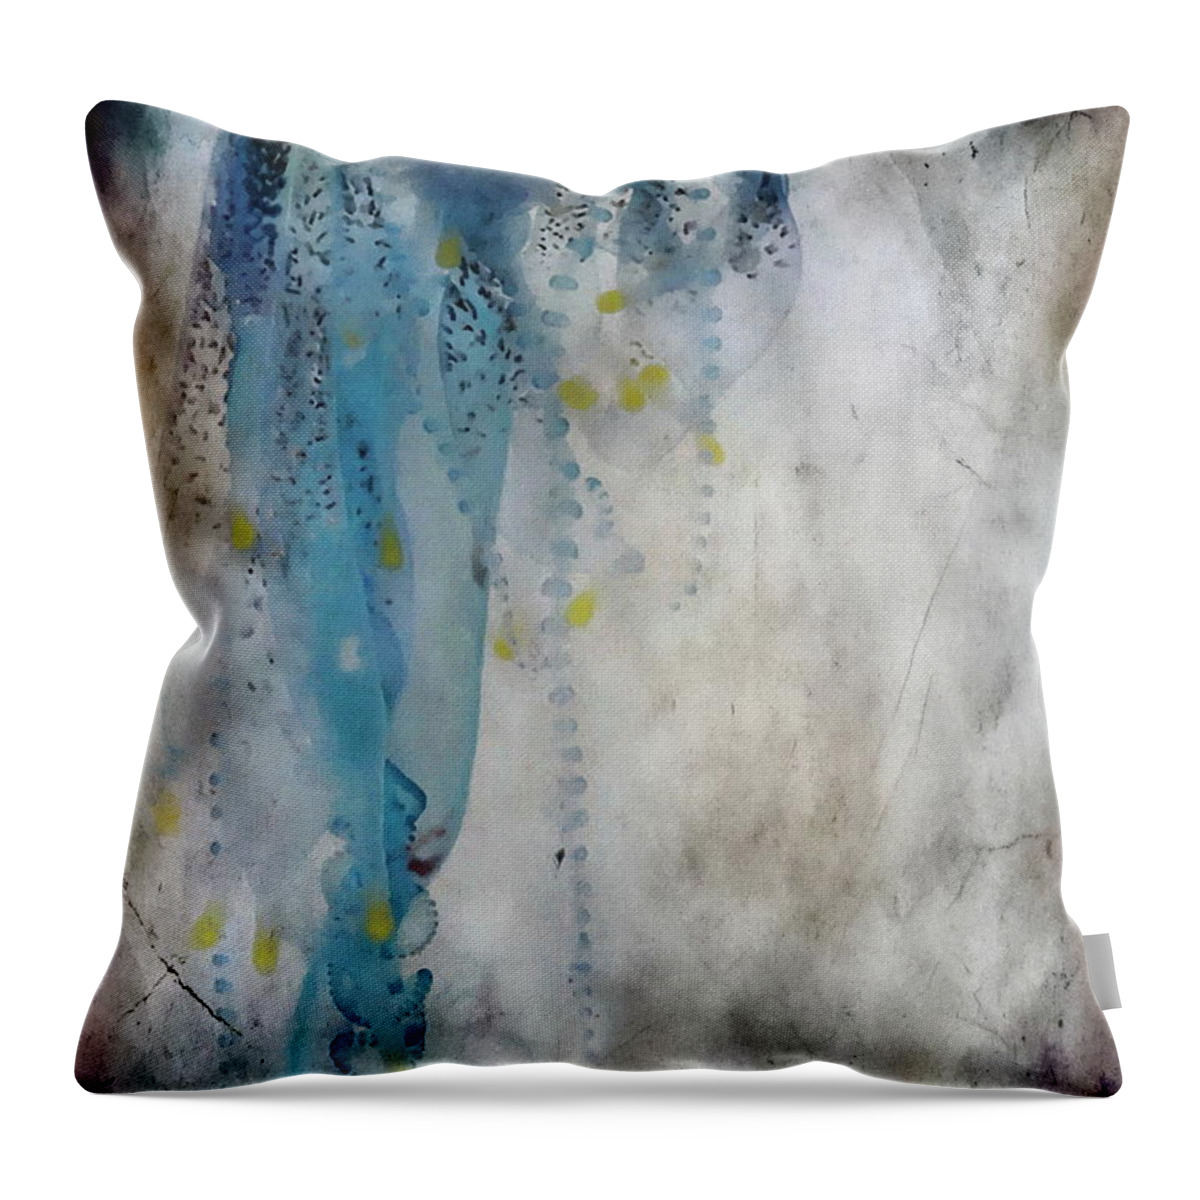 Jellyfish Throw Pillow featuring the photograph Jellyfish Fine Art #2 by Andrea Kollo